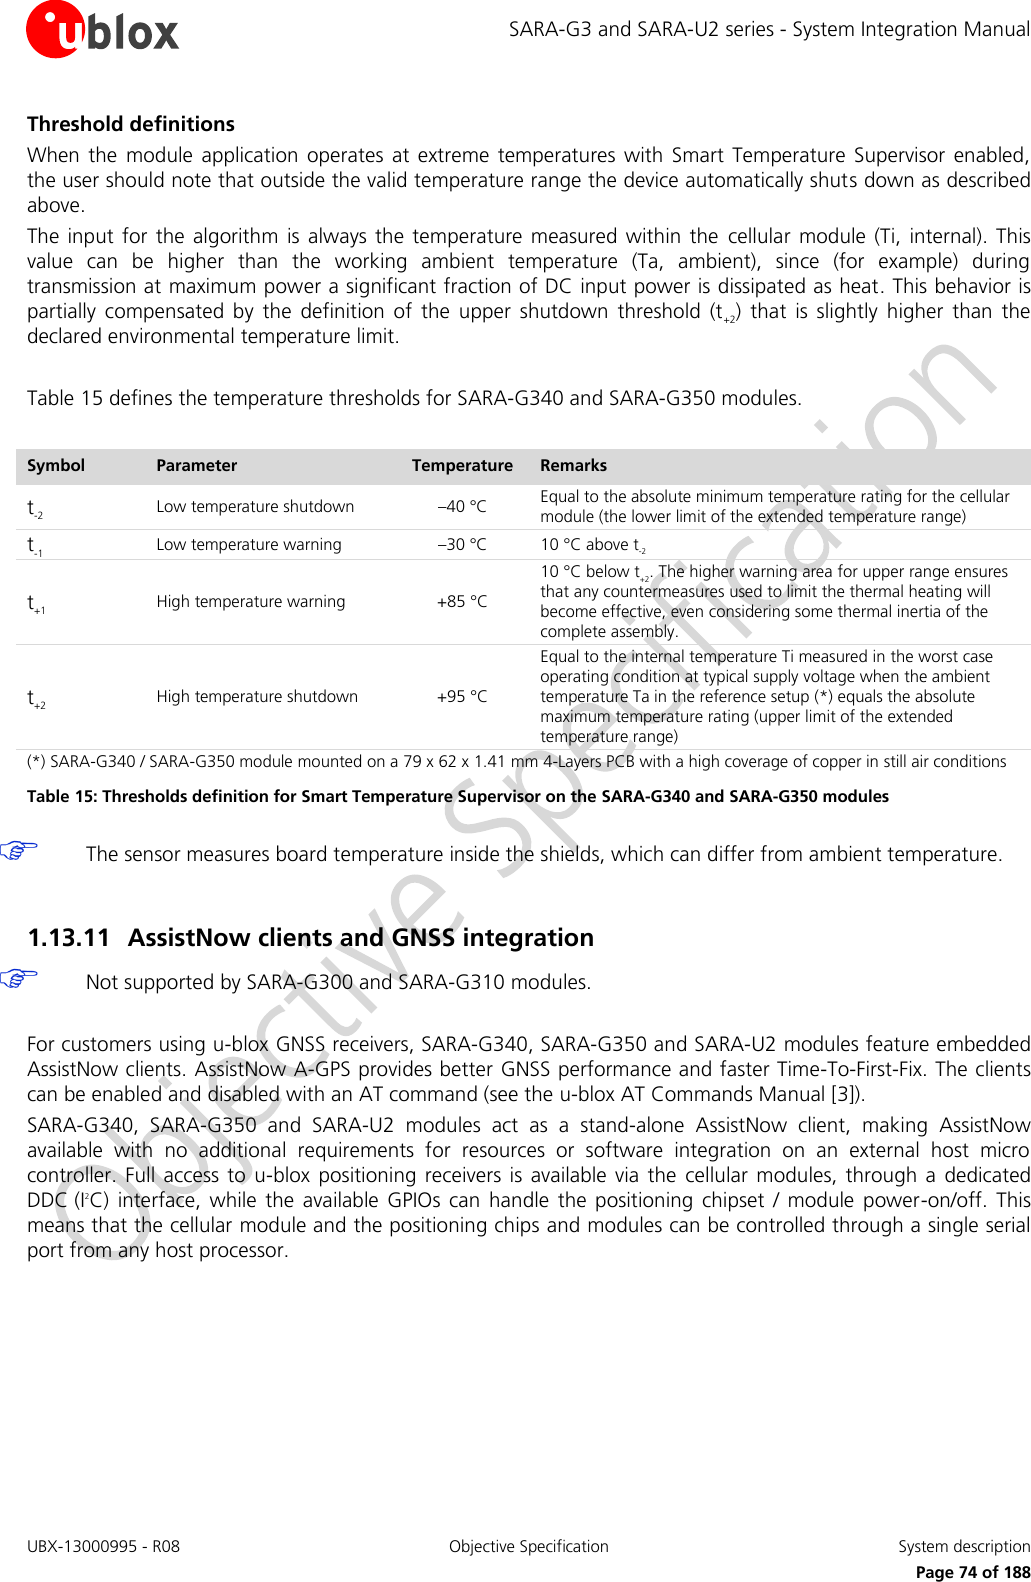 SARA-G3 and SARA-U2 series - System Integration Manual UBX-13000995 - R08  Objective Specification  System description     Page 74 of 188 Threshold definitions When  the  module  application  operates  at  extreme temperatures  with  Smart  Temperature  Supervisor  enabled, the user should note that outside the valid temperature range the device automatically shuts down as described above. The  input for  the  algorithm  is always the temperature measured within the  cellular  module  (Ti,  internal). This value  can  be  higher  than  the  working  ambient  temperature  (Ta,  ambient),  since  (for  example)  during transmission at maximum power a significant fraction of DC input power is dissipated as heat. This behavior is partially  compensated  by  the  definition  of  the  upper  shutdown  threshold  (t+2)  that  is  slightly  higher  than  the declared environmental temperature limit.  Table 15 defines the temperature thresholds for SARA-G340 and SARA-G350 modules.  Symbol Parameter Temperature Remarks t-2 Low temperature shutdown –40 °C Equal to the absolute minimum temperature rating for the cellular module (the lower limit of the extended temperature range) t-1 Low temperature warning –30 °C 10 °C above t-2 t+1 High temperature warning +85 °C 10 °C below t+2. The higher warning area for upper range ensures that any countermeasures used to limit the thermal heating will become effective, even considering some thermal inertia of the complete assembly. t+2 High temperature shutdown +95 °C Equal to the internal temperature Ti measured in the worst case operating condition at typical supply voltage when the ambient temperature Ta in the reference setup (*) equals the absolute maximum temperature rating (upper limit of the extended temperature range) (*) SARA-G340 / SARA-G350 module mounted on a 79 x 62 x 1.41 mm 4-Layers PCB with a high coverage of copper in still air conditions Table 15: Thresholds definition for Smart Temperature Supervisor on the SARA-G340 and SARA-G350 modules  The sensor measures board temperature inside the shields, which can differ from ambient temperature.  1.13.11 AssistNow clients and GNSS integration  Not supported by SARA-G300 and SARA-G310 modules.  For customers using u-blox GNSS receivers, SARA-G340, SARA-G350 and SARA-U2 modules feature embedded AssistNow clients. AssistNow A-GPS provides better GNSS performance and faster Time-To-First-Fix. The clients can be enabled and disabled with an AT command (see the u-blox AT Commands Manual [3]). SARA-G340,  SARA-G350  and  SARA-U2  modules  act  as  a  stand-alone  AssistNow  client,  making  AssistNow available  with  no  additional  requirements  for  resources  or  software  integration  on  an  external  host  micro controller.  Full access to  u-blox  positioning receivers  is  available via  the  cellular  modules,  through a  dedicated DDC (I2C)  interface,  while  the  available  GPIOs  can  handle  the  positioning  chipset  /  module  power-on/off.  This means that the cellular module and the positioning chips and modules can be controlled through a single serial port from any host processor.   